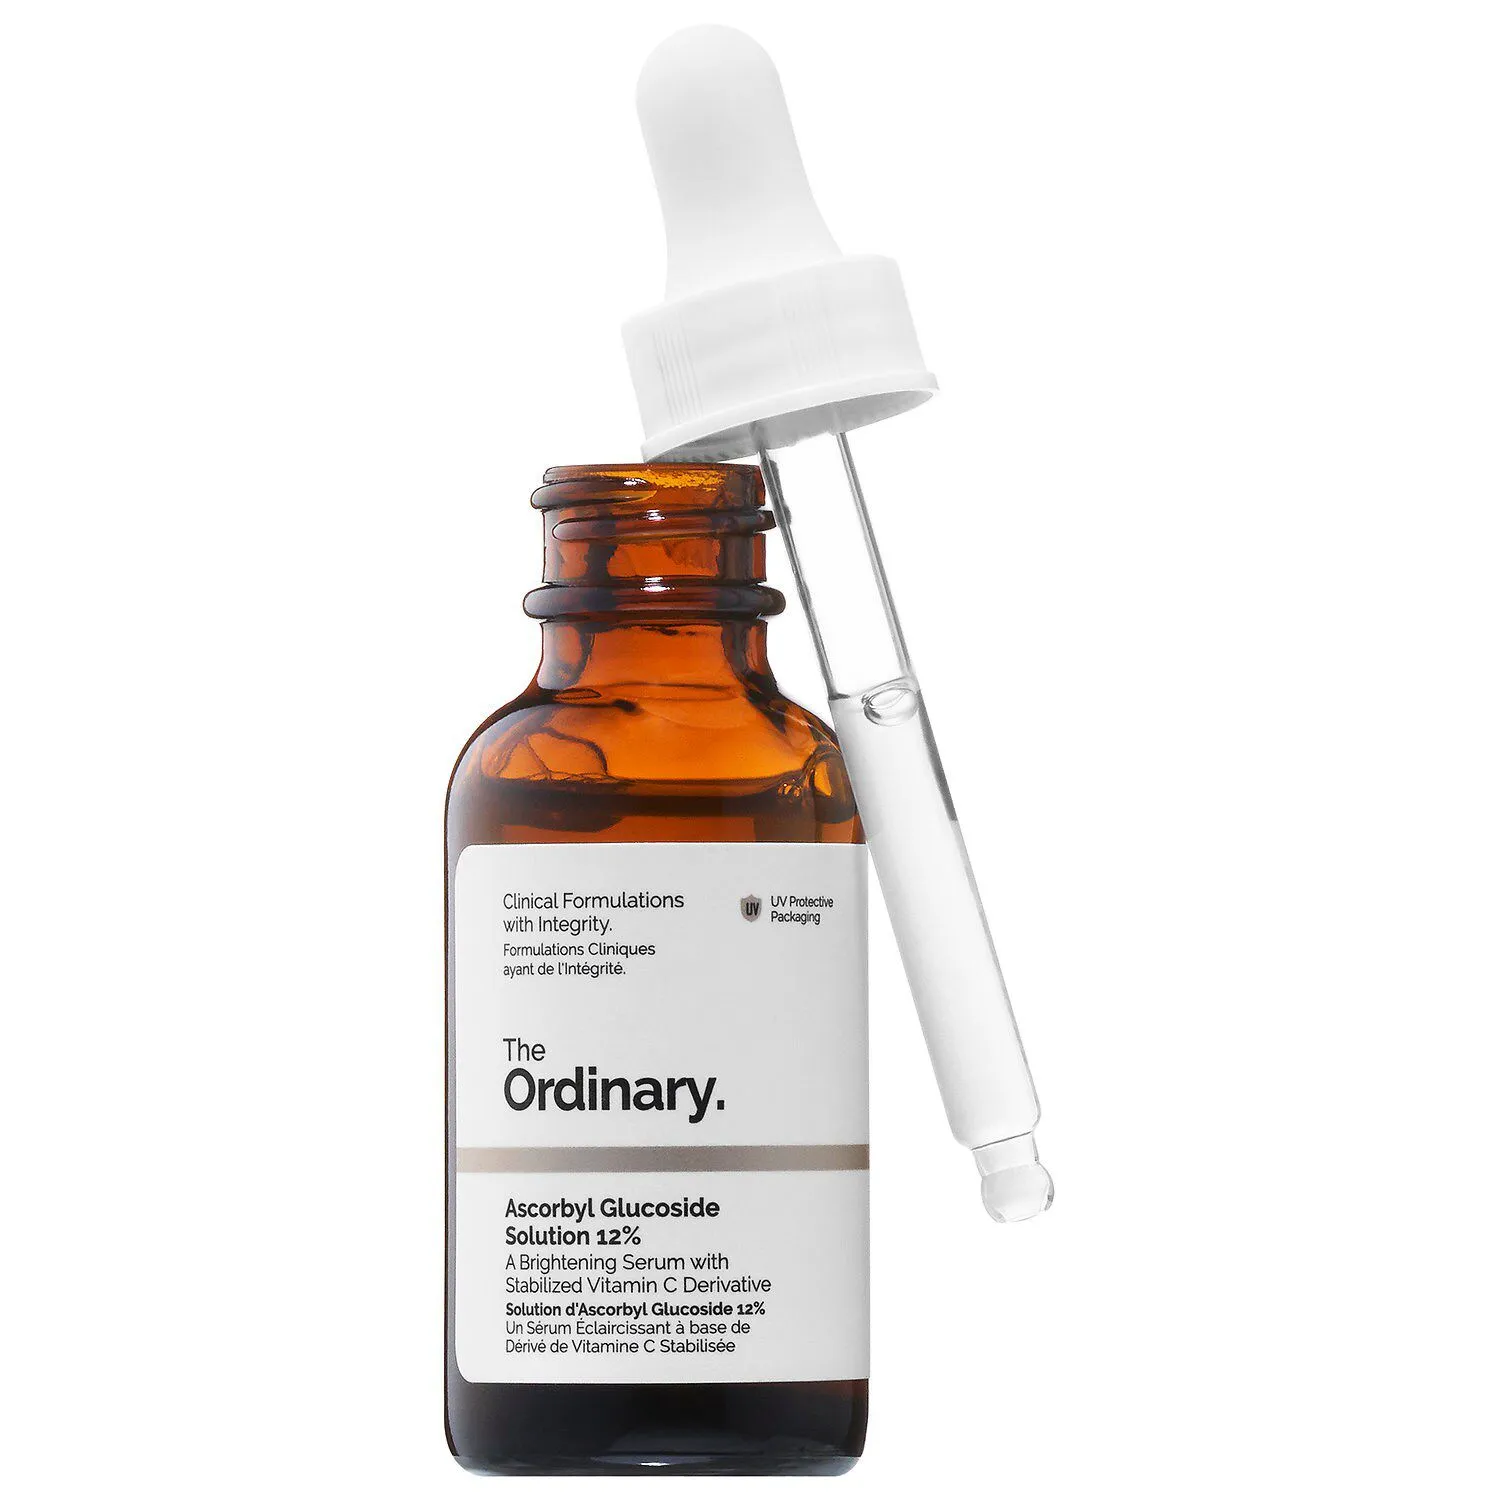 FEMMENORDIC's choice in The Ordinary vs Mad Hippie comparison, The Ordinary’s Ascorbyl Glucoside Solution 12%